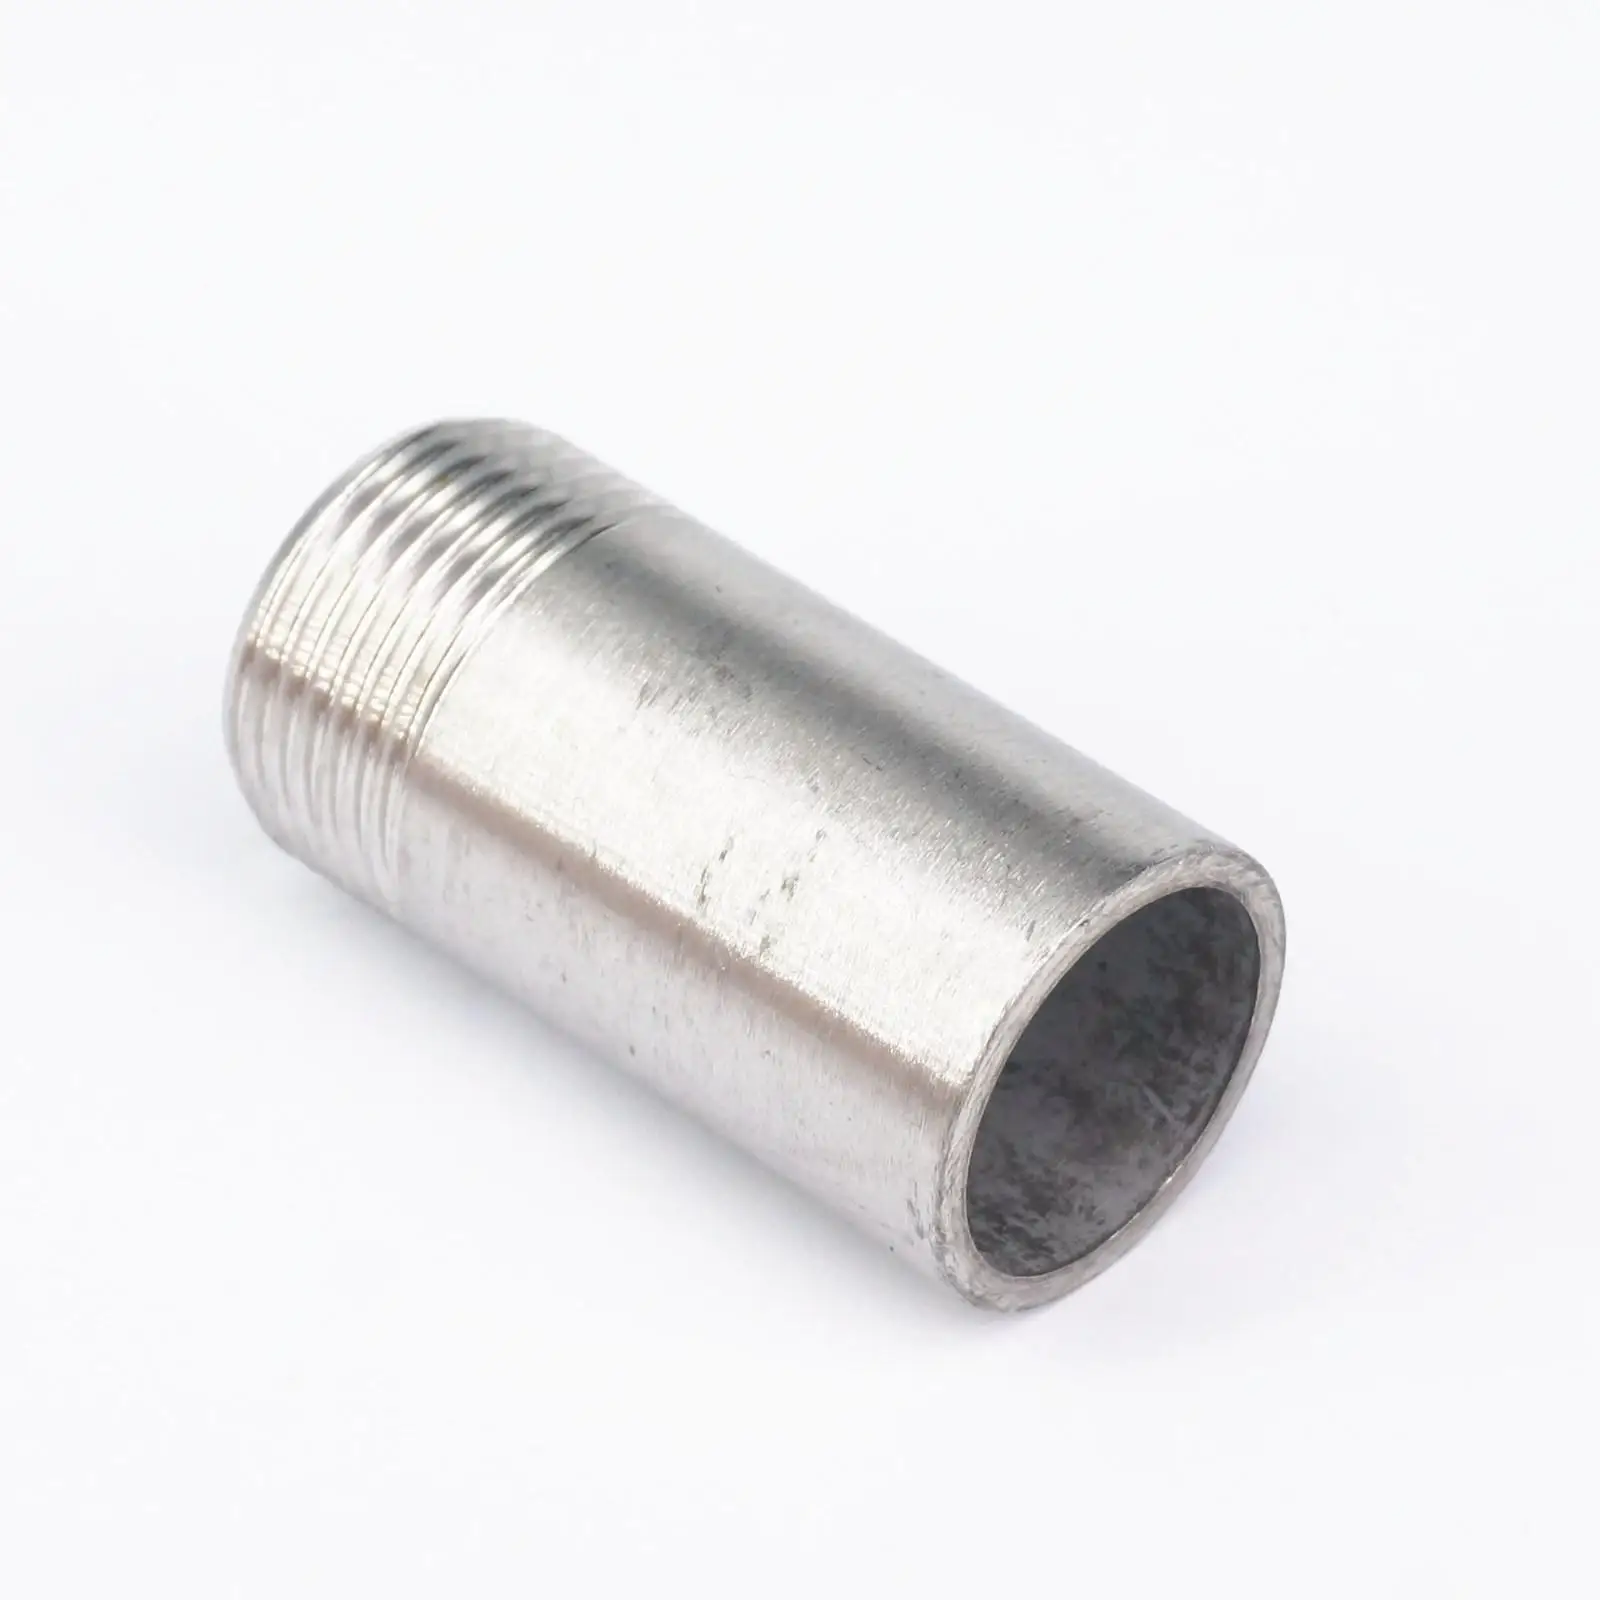 

3/4" BSP male Thread Length 50mm 304 Stainless Steel Pipe Fitting Weld Nipple Coupling Connector BSP,